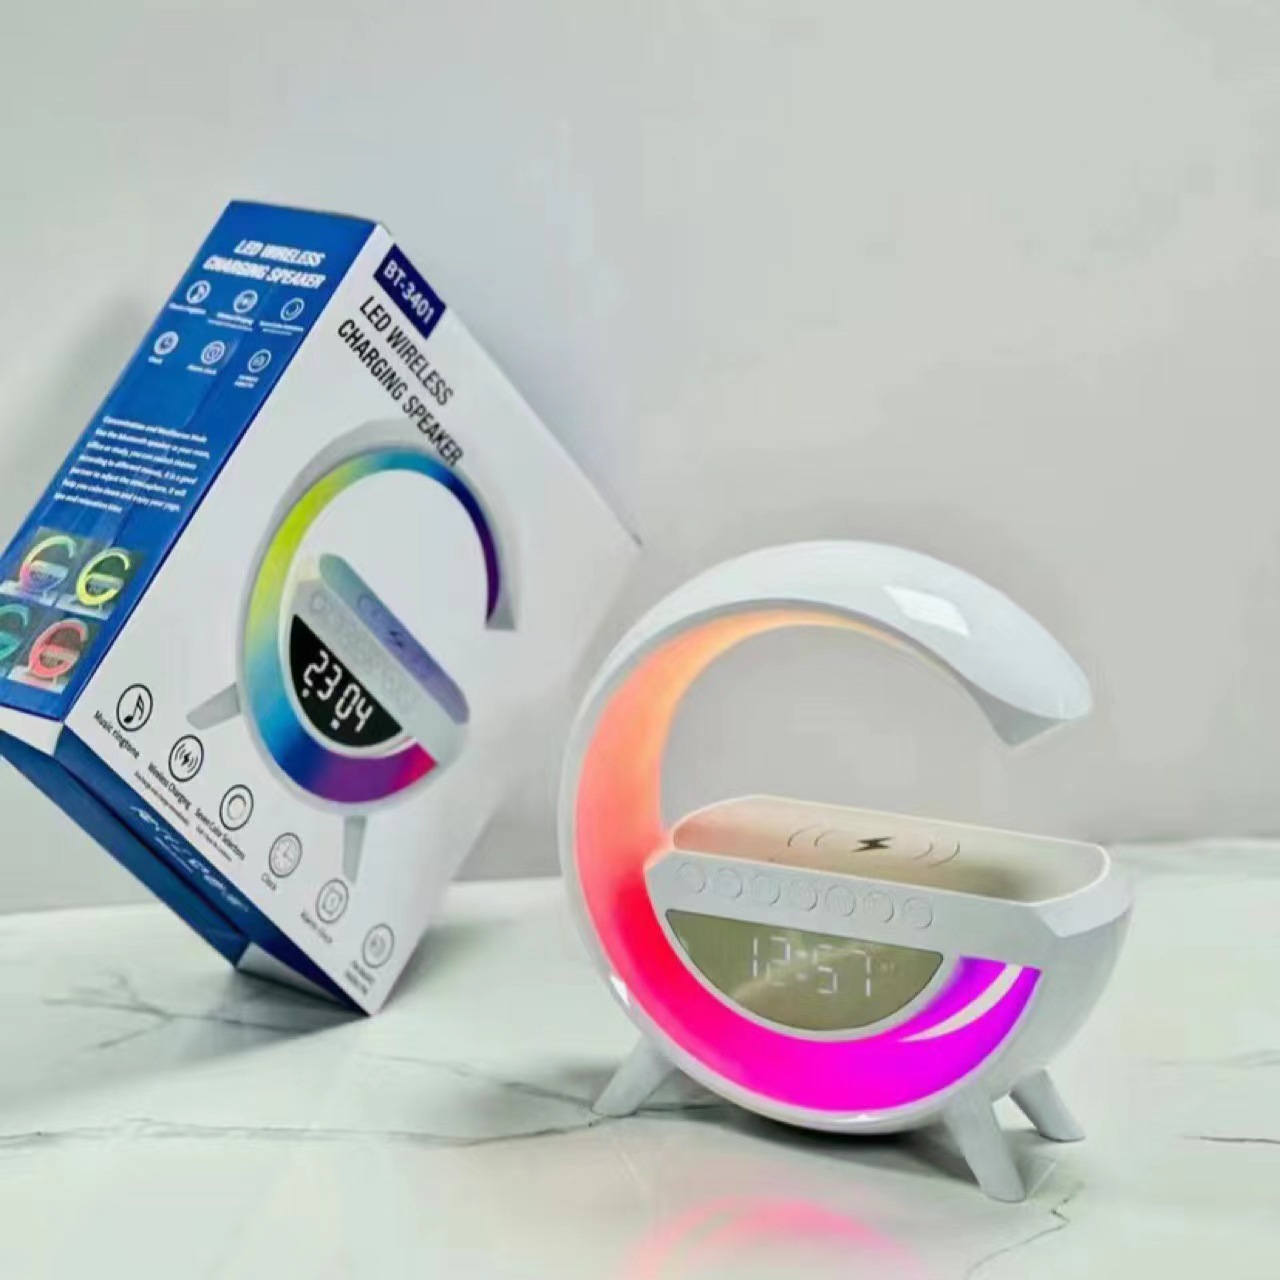 New Large G Bluetooth Audio Smart Phone Wireless Fast Charging Bedside Colorful Table Lamp USB Multi-Function Large G Speaker